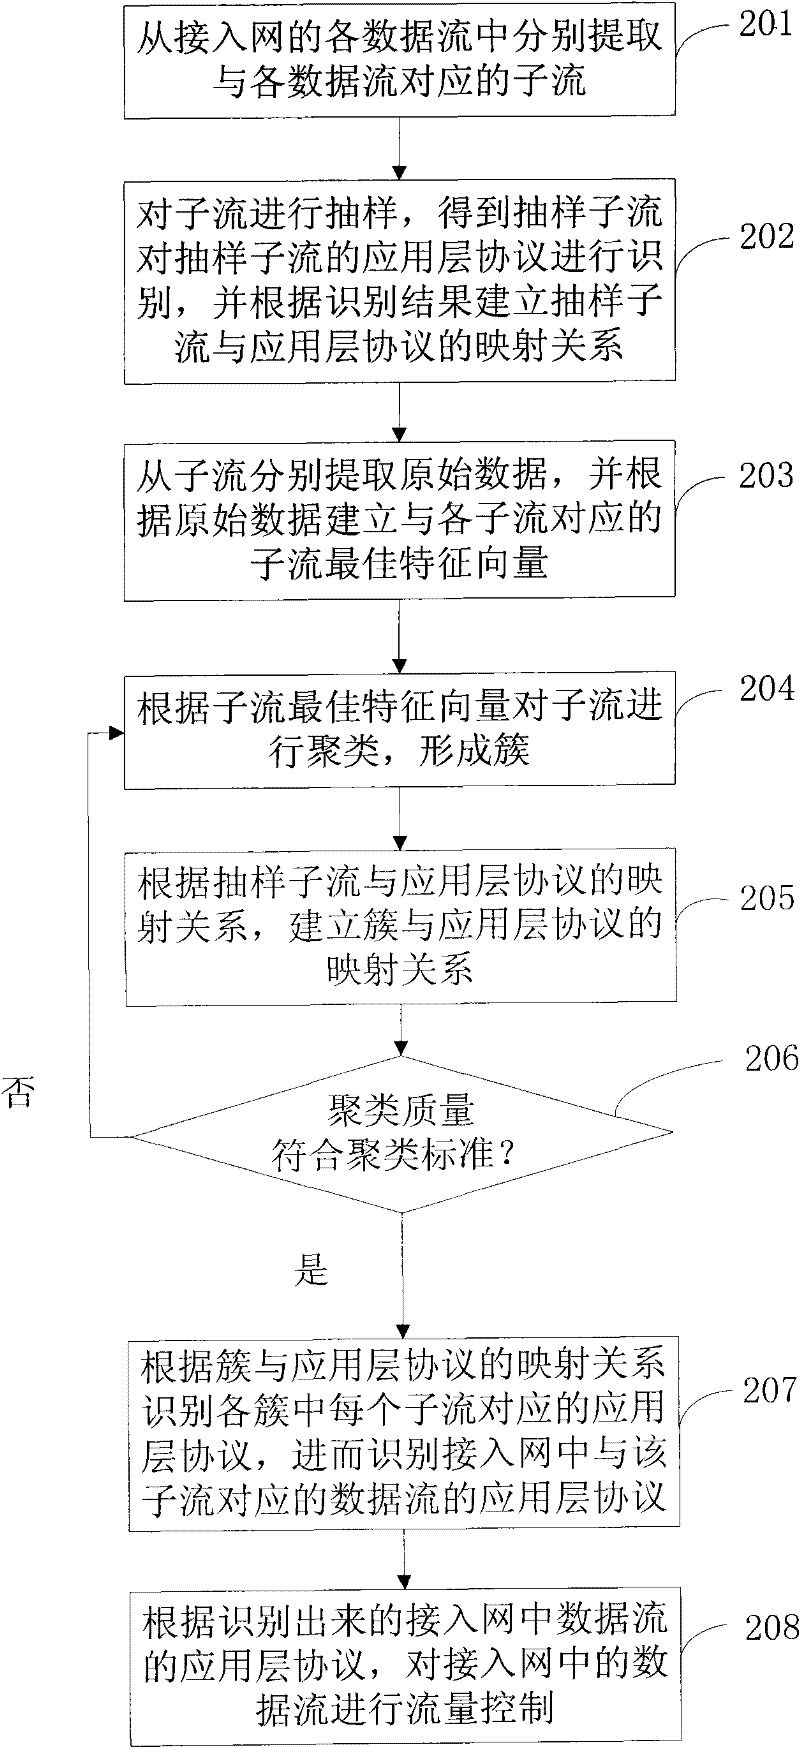 Method and device for identifying traffic of access network